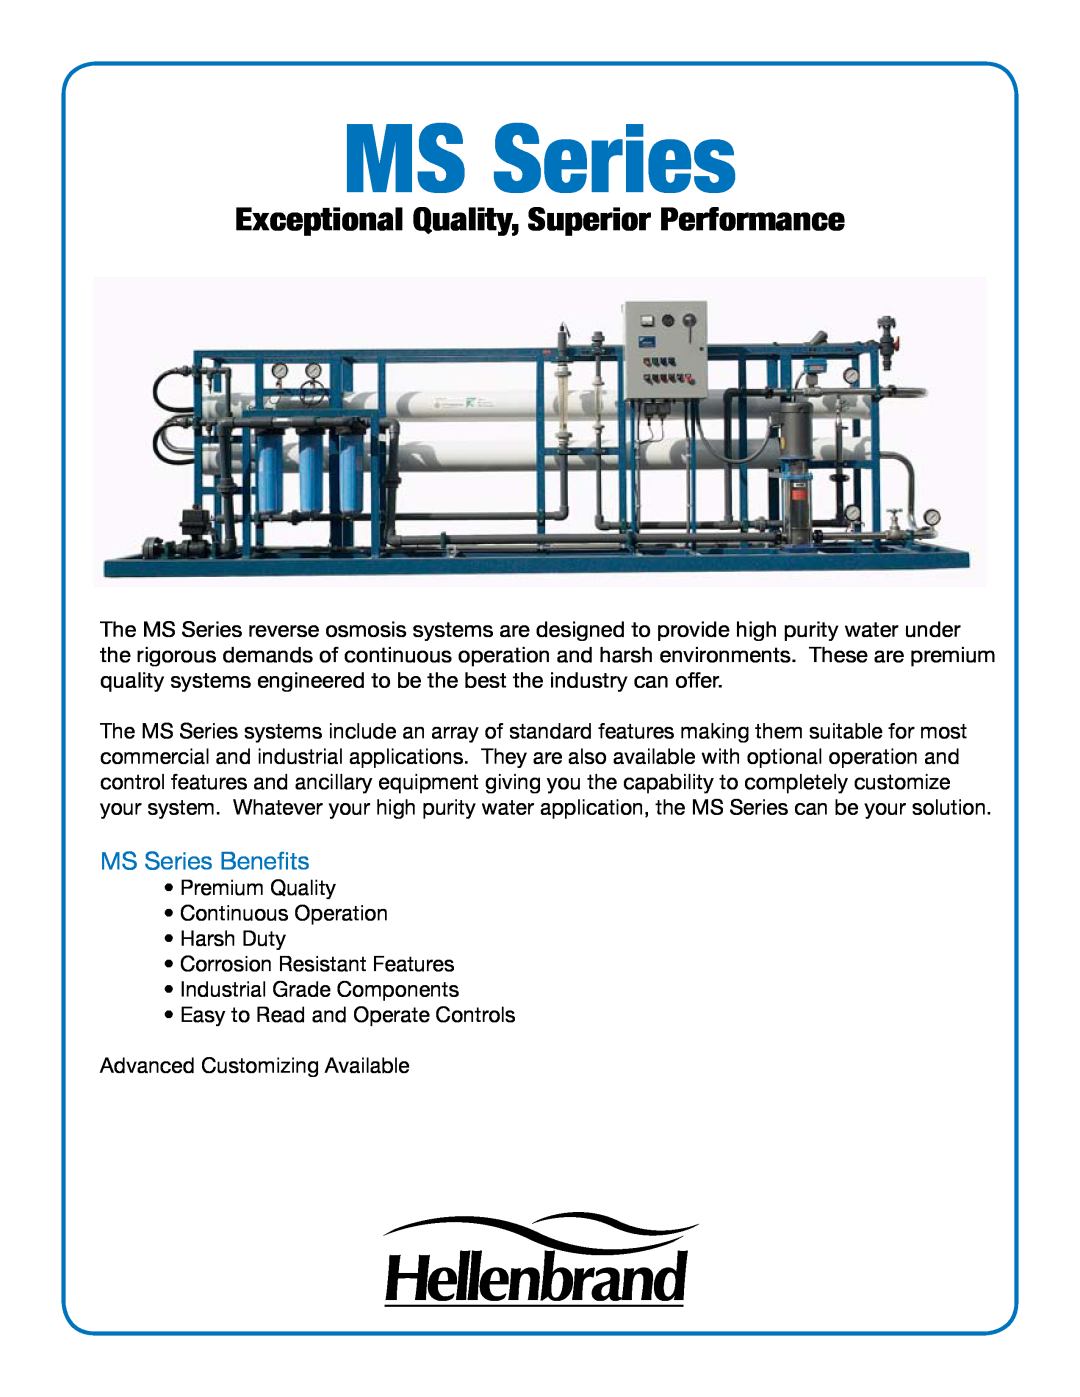 Hellenbrand manual MS Series Benefits, Exceptional Quality, Superior Performance 